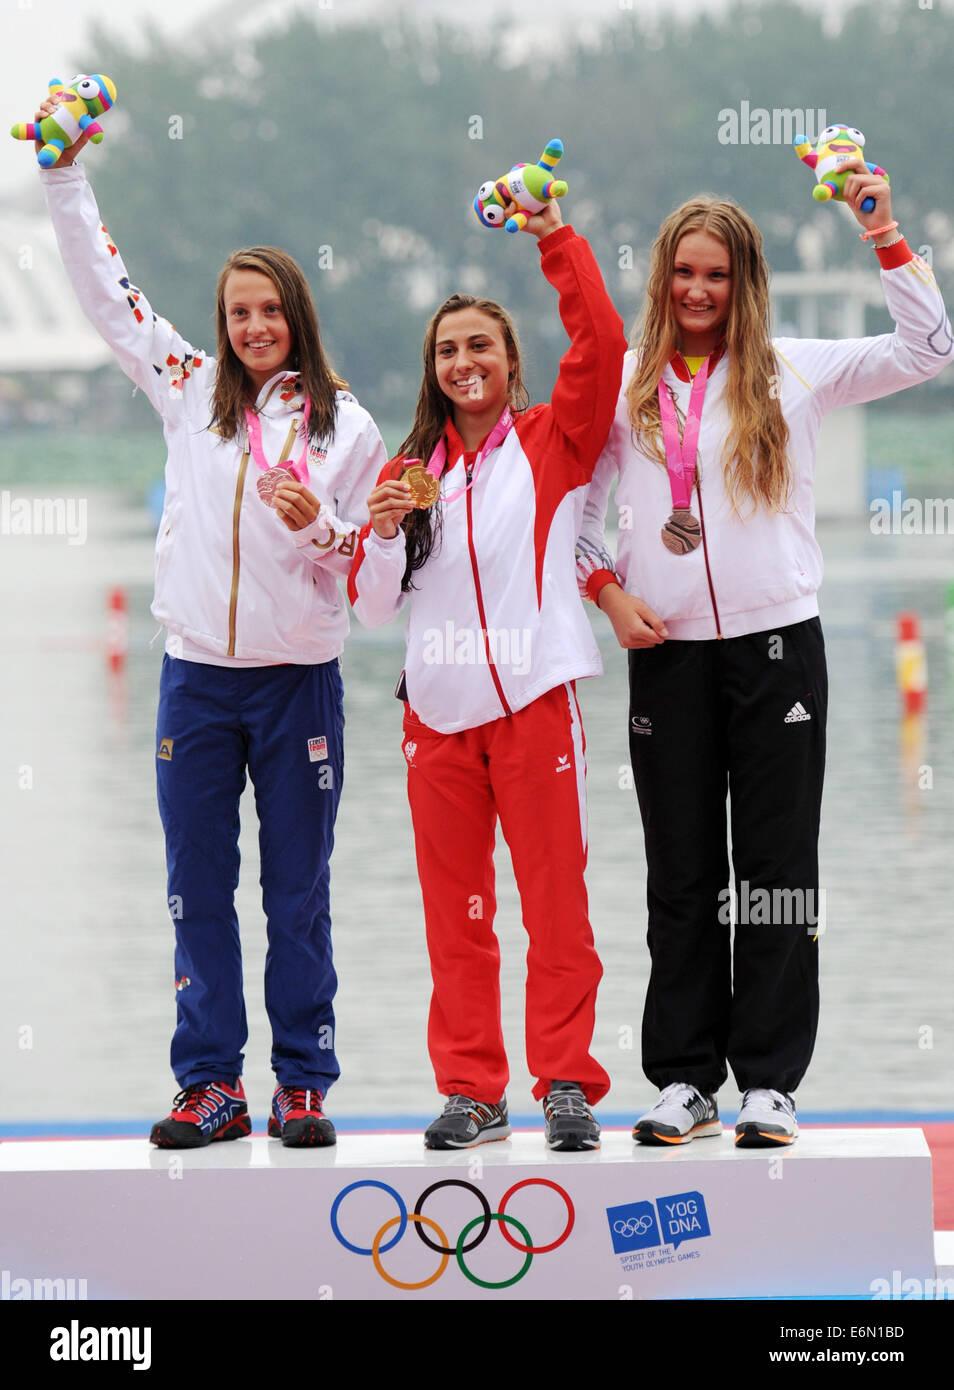 Nanjing, China's Jiangsu Province. 27th Aug, 2014. Gold medalist Nadine Weratschnig(C) of Austria, silver medalist Martina Satkova(L) of Czech Republic and bronze medalist Birgit Ohmayer of Germany pose on the podium during the awarding ceremony for the women's C1 obstacle canoe slalom of Canoe-Kayak event during Nanjing 2014 Youth Olympic Games in Nanjing, capital of east China's Jiangsu Province, on Aug. 27, 2014. Credit:  Chen Yehua/Xinhua/Alamy Live News Stock Photo